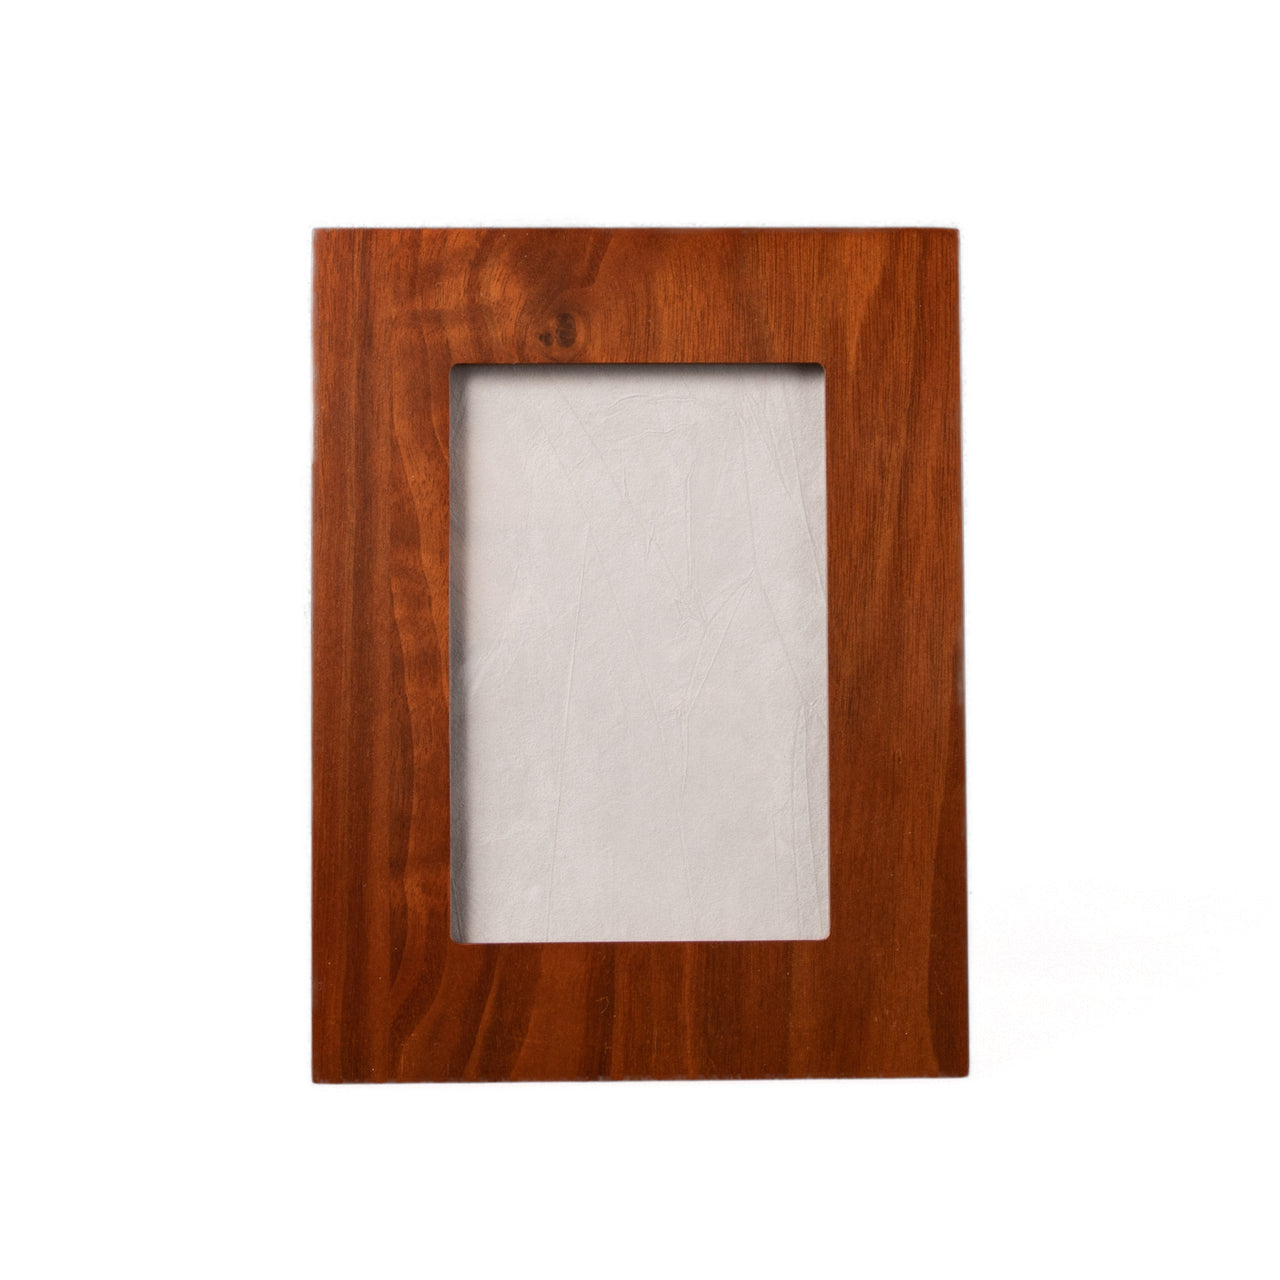 Brouk & Co Walnut Picture Frame